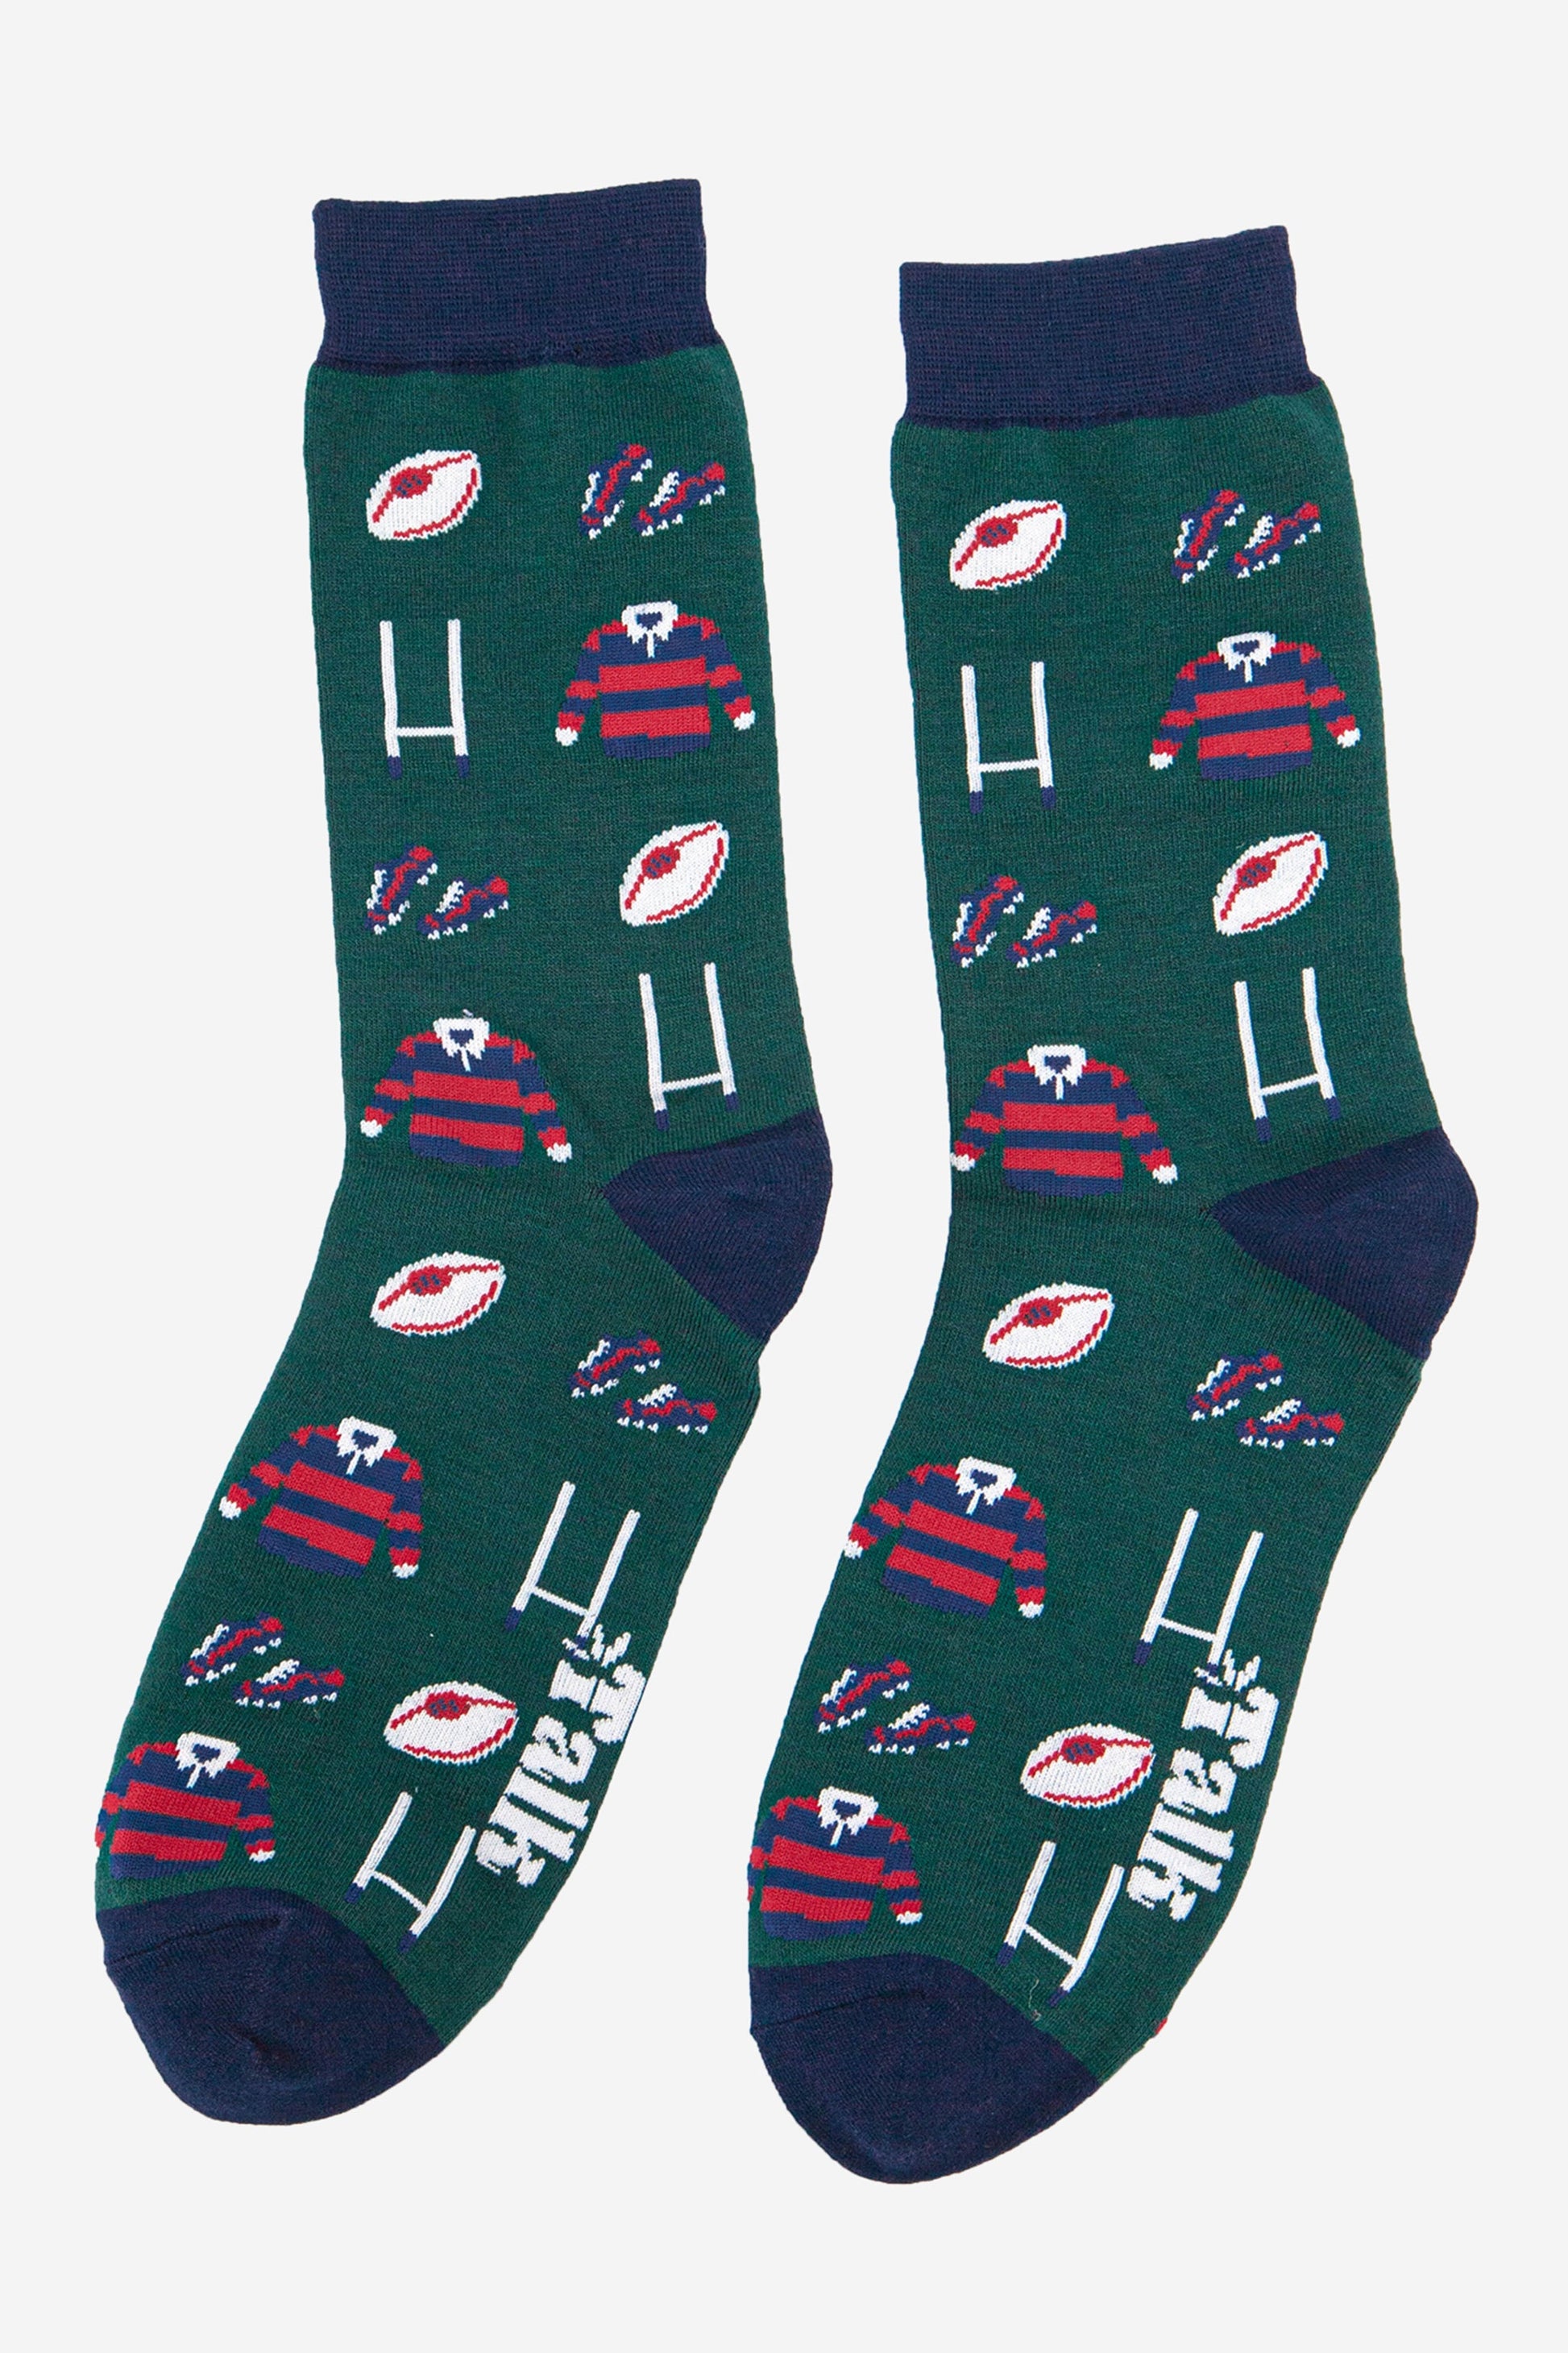 mens green and navy blue rugby sports socks in bamboo